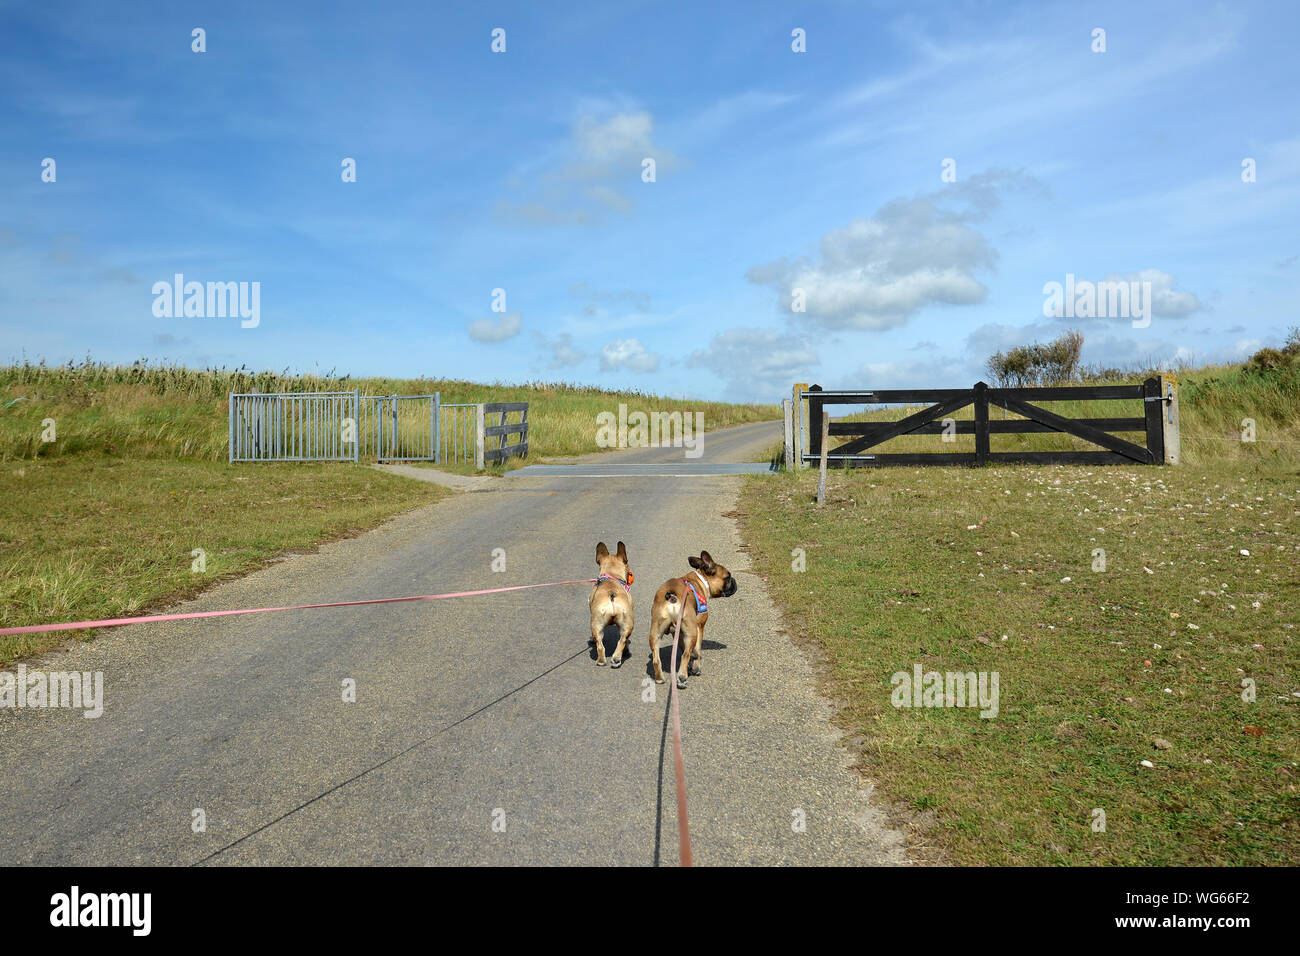 Back view of two French Buldog dogs on long leashes walking through national park 'De Muy' in the Netherlands on island Texel Stock Photo